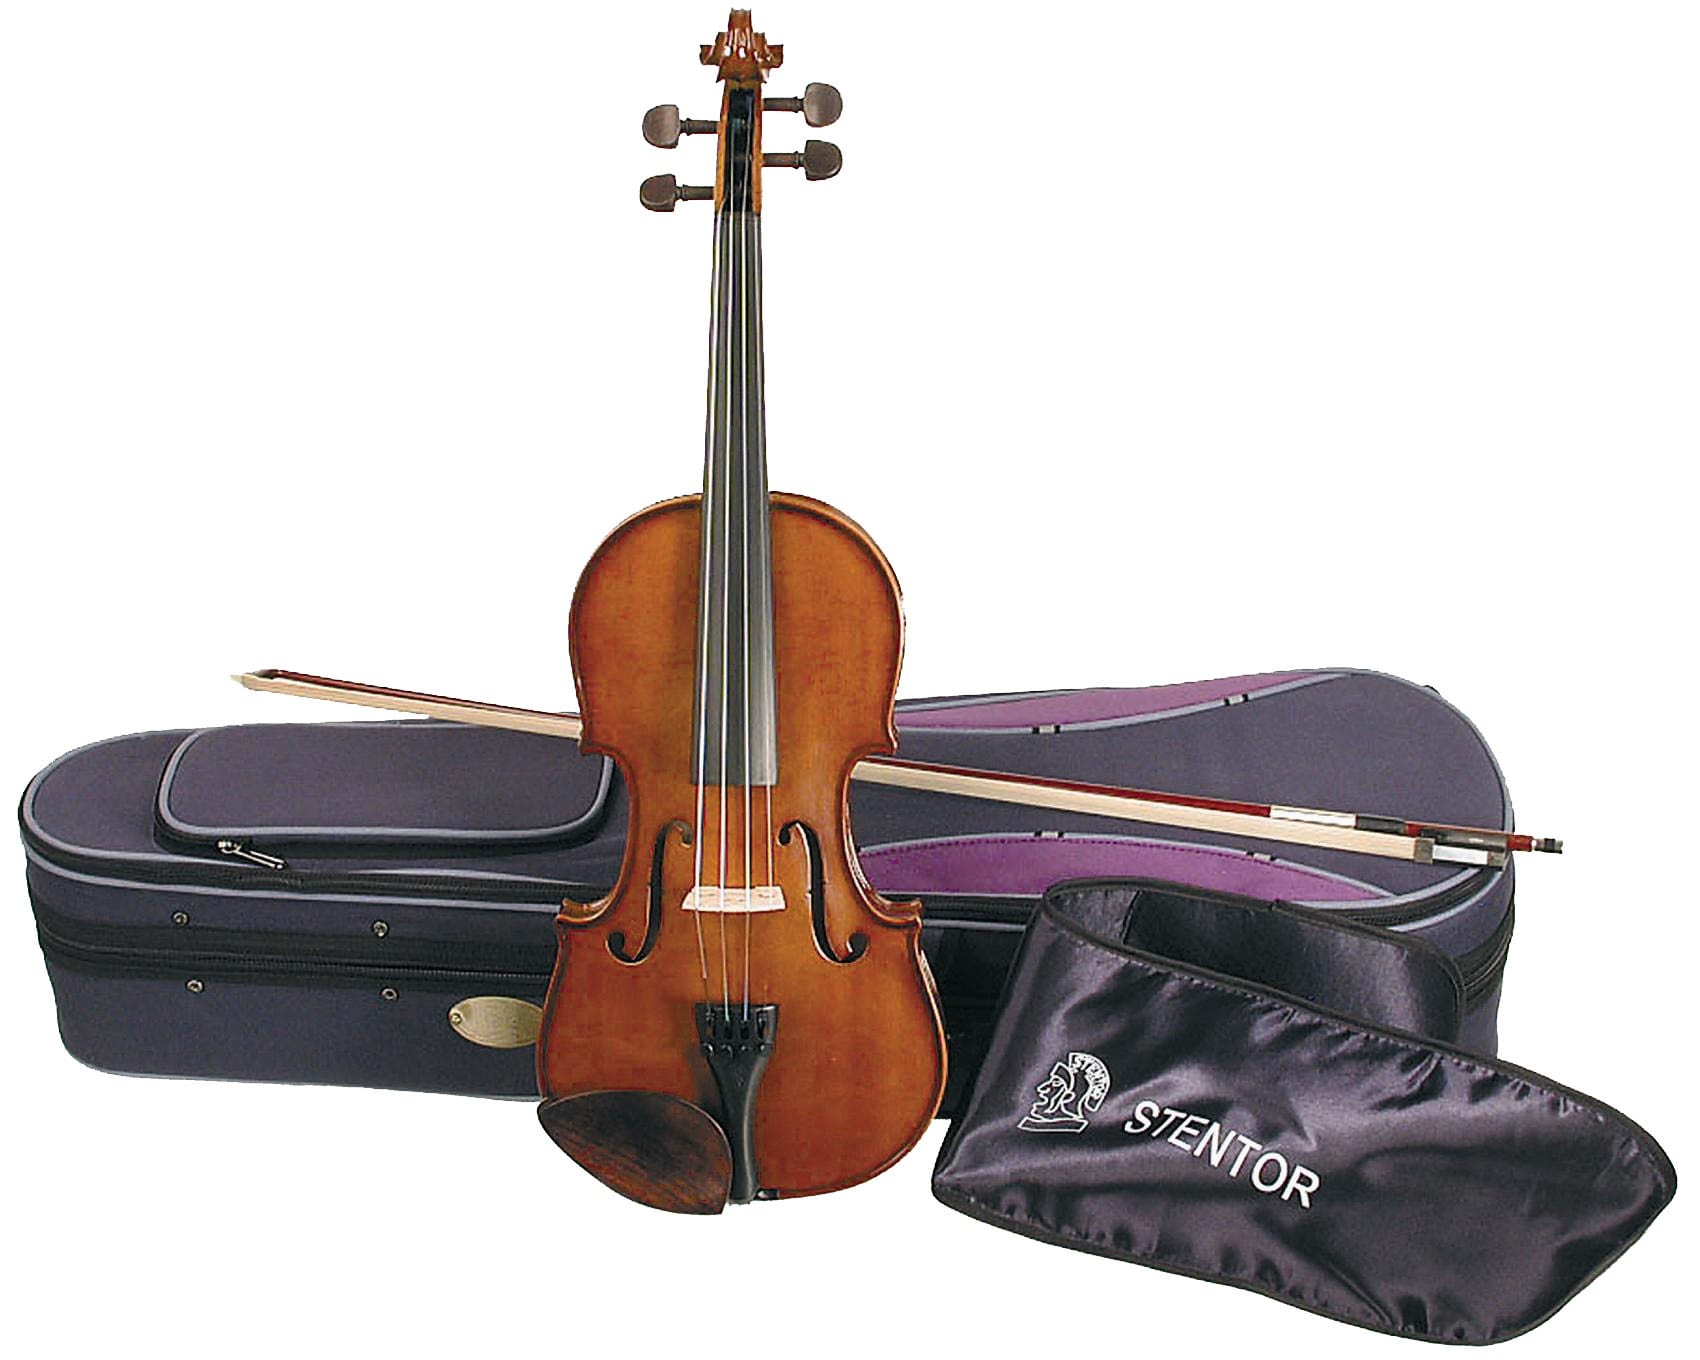 What Are the Best Violin Brands for Beginners?